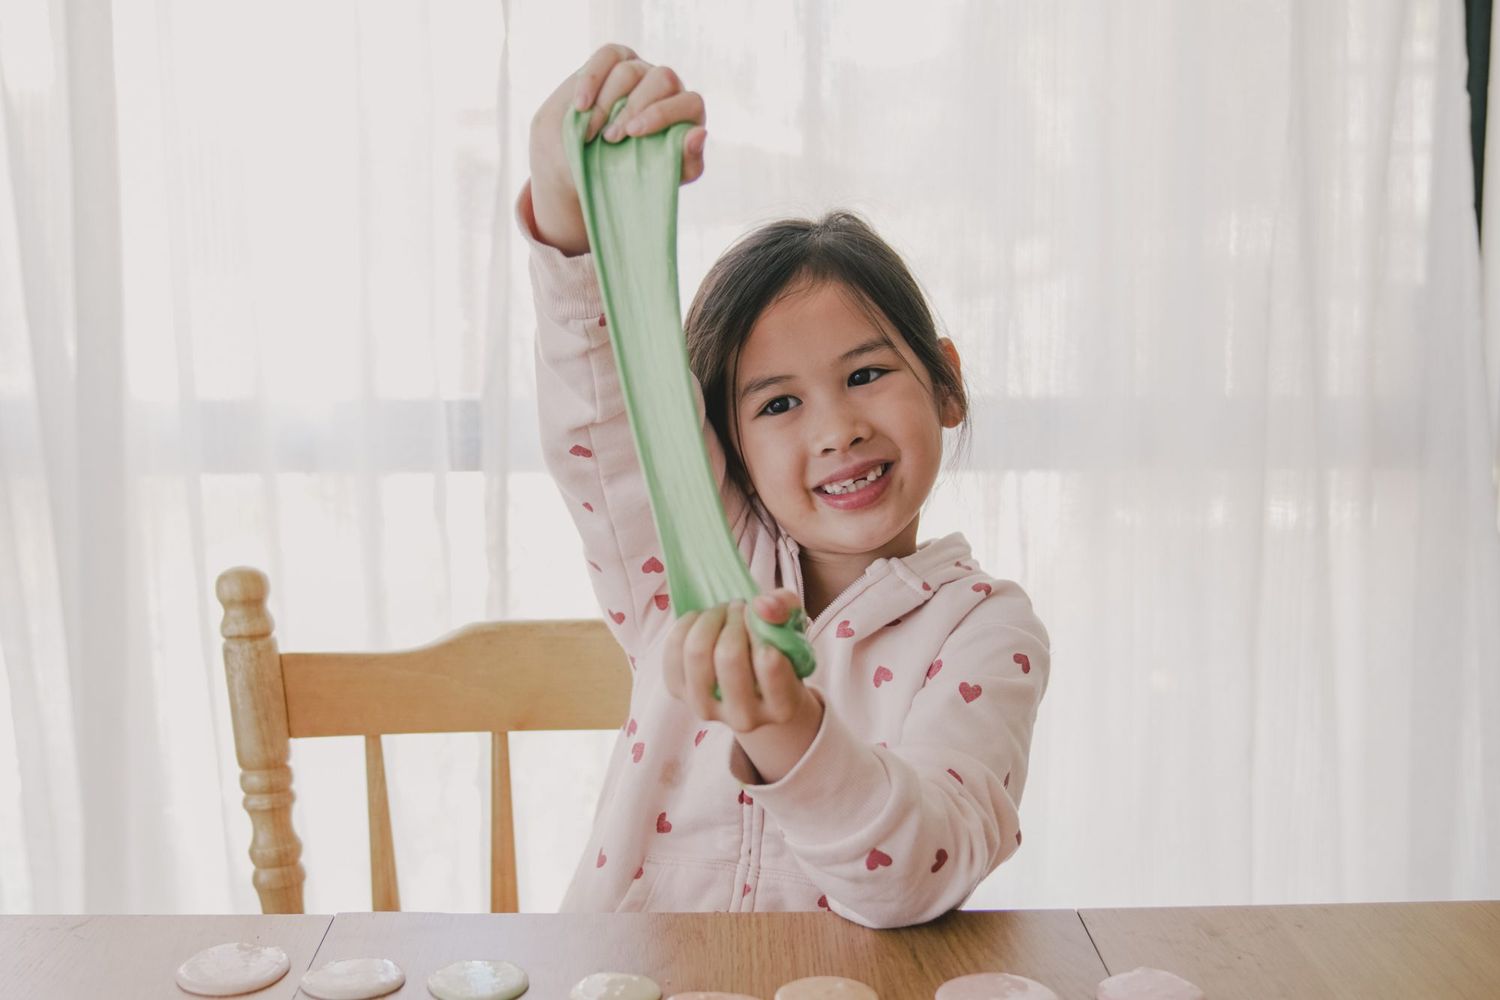 An image of a little girl playing with slime.